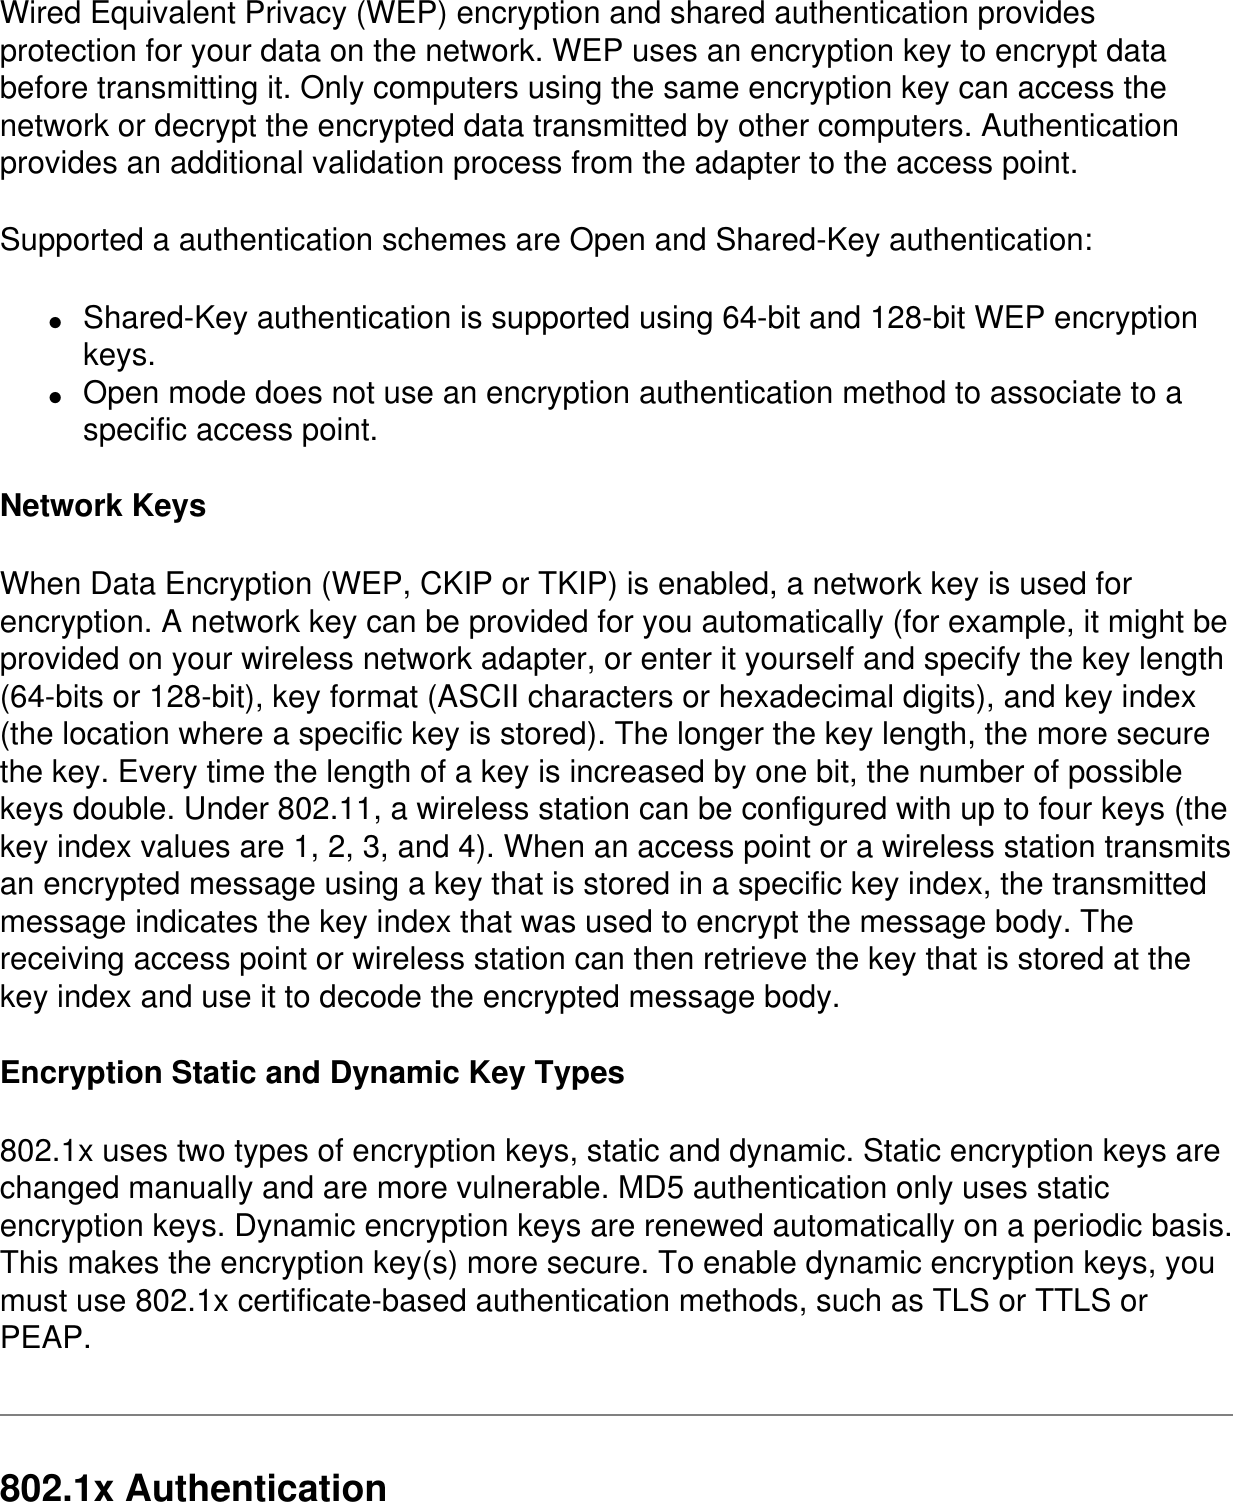 Wired Equivalent Privacy (WEP) encryption and shared authentication provides protection for your data on the network. WEP uses an encryption key to encrypt data before transmitting it. Only computers using the same encryption key can access the network or decrypt the encrypted data transmitted by other computers. Authentication provides an additional validation process from the adapter to the access point.Supported a authentication schemes are Open and Shared-Key authentication:●     Shared-Key authentication is supported using 64-bit and 128-bit WEP encryption keys.●     Open mode does not use an encryption authentication method to associate to a specific access point.Network KeysWhen Data Encryption (WEP, CKIP or TKIP) is enabled, a network key is used for encryption. A network key can be provided for you automatically (for example, it might be provided on your wireless network adapter, or enter it yourself and specify the key length (64-bits or 128-bit), key format (ASCII characters or hexadecimal digits), and key index (the location where a specific key is stored). The longer the key length, the more secure the key. Every time the length of a key is increased by one bit, the number of possible keys double. Under 802.11, a wireless station can be configured with up to four keys (the key index values are 1, 2, 3, and 4). When an access point or a wireless station transmits an encrypted message using a key that is stored in a specific key index, the transmitted message indicates the key index that was used to encrypt the message body. The receiving access point or wireless station can then retrieve the key that is stored at the key index and use it to decode the encrypted message body.Encryption Static and Dynamic Key Types802.1x uses two types of encryption keys, static and dynamic. Static encryption keys are changed manually and are more vulnerable. MD5 authentication only uses static encryption keys. Dynamic encryption keys are renewed automatically on a periodic basis. This makes the encryption key(s) more secure. To enable dynamic encryption keys, you must use 802.1x certificate-based authentication methods, such as TLS or TTLS or PEAP.802.1x Authentication